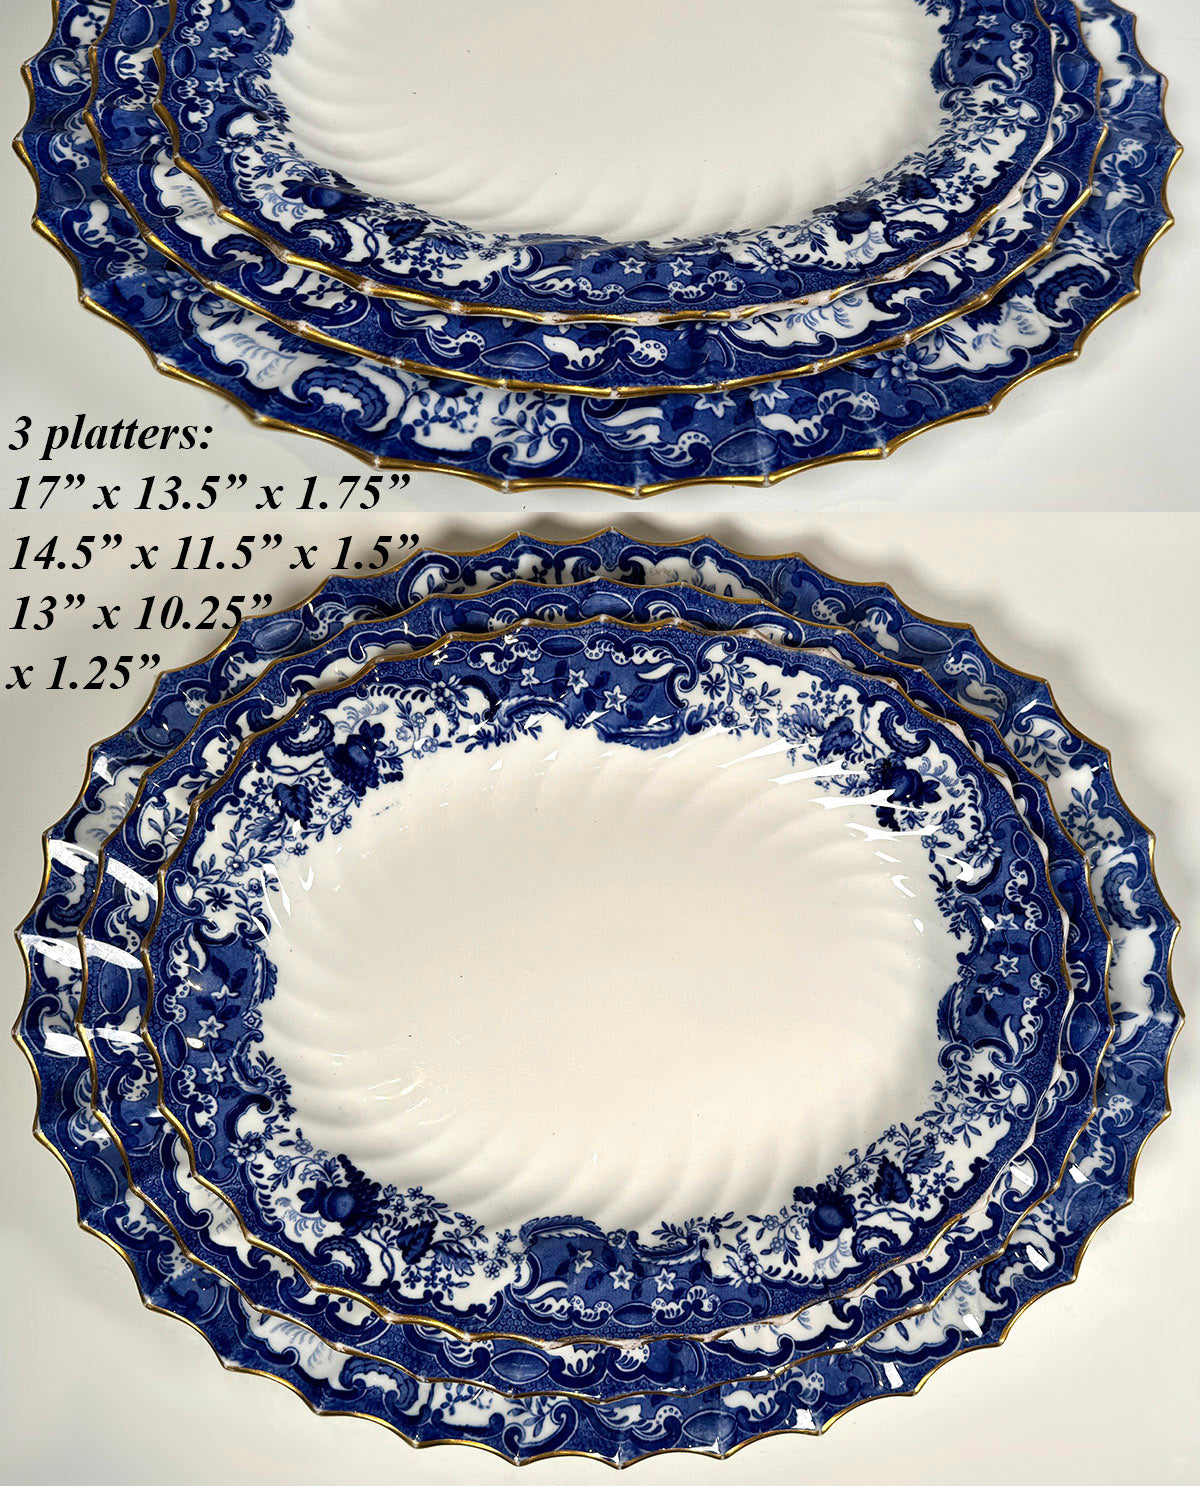 RARE Matching Set of 3 Large c.1890 English Flow Blue Transferware Platters, by Copeland (Spode) "May"